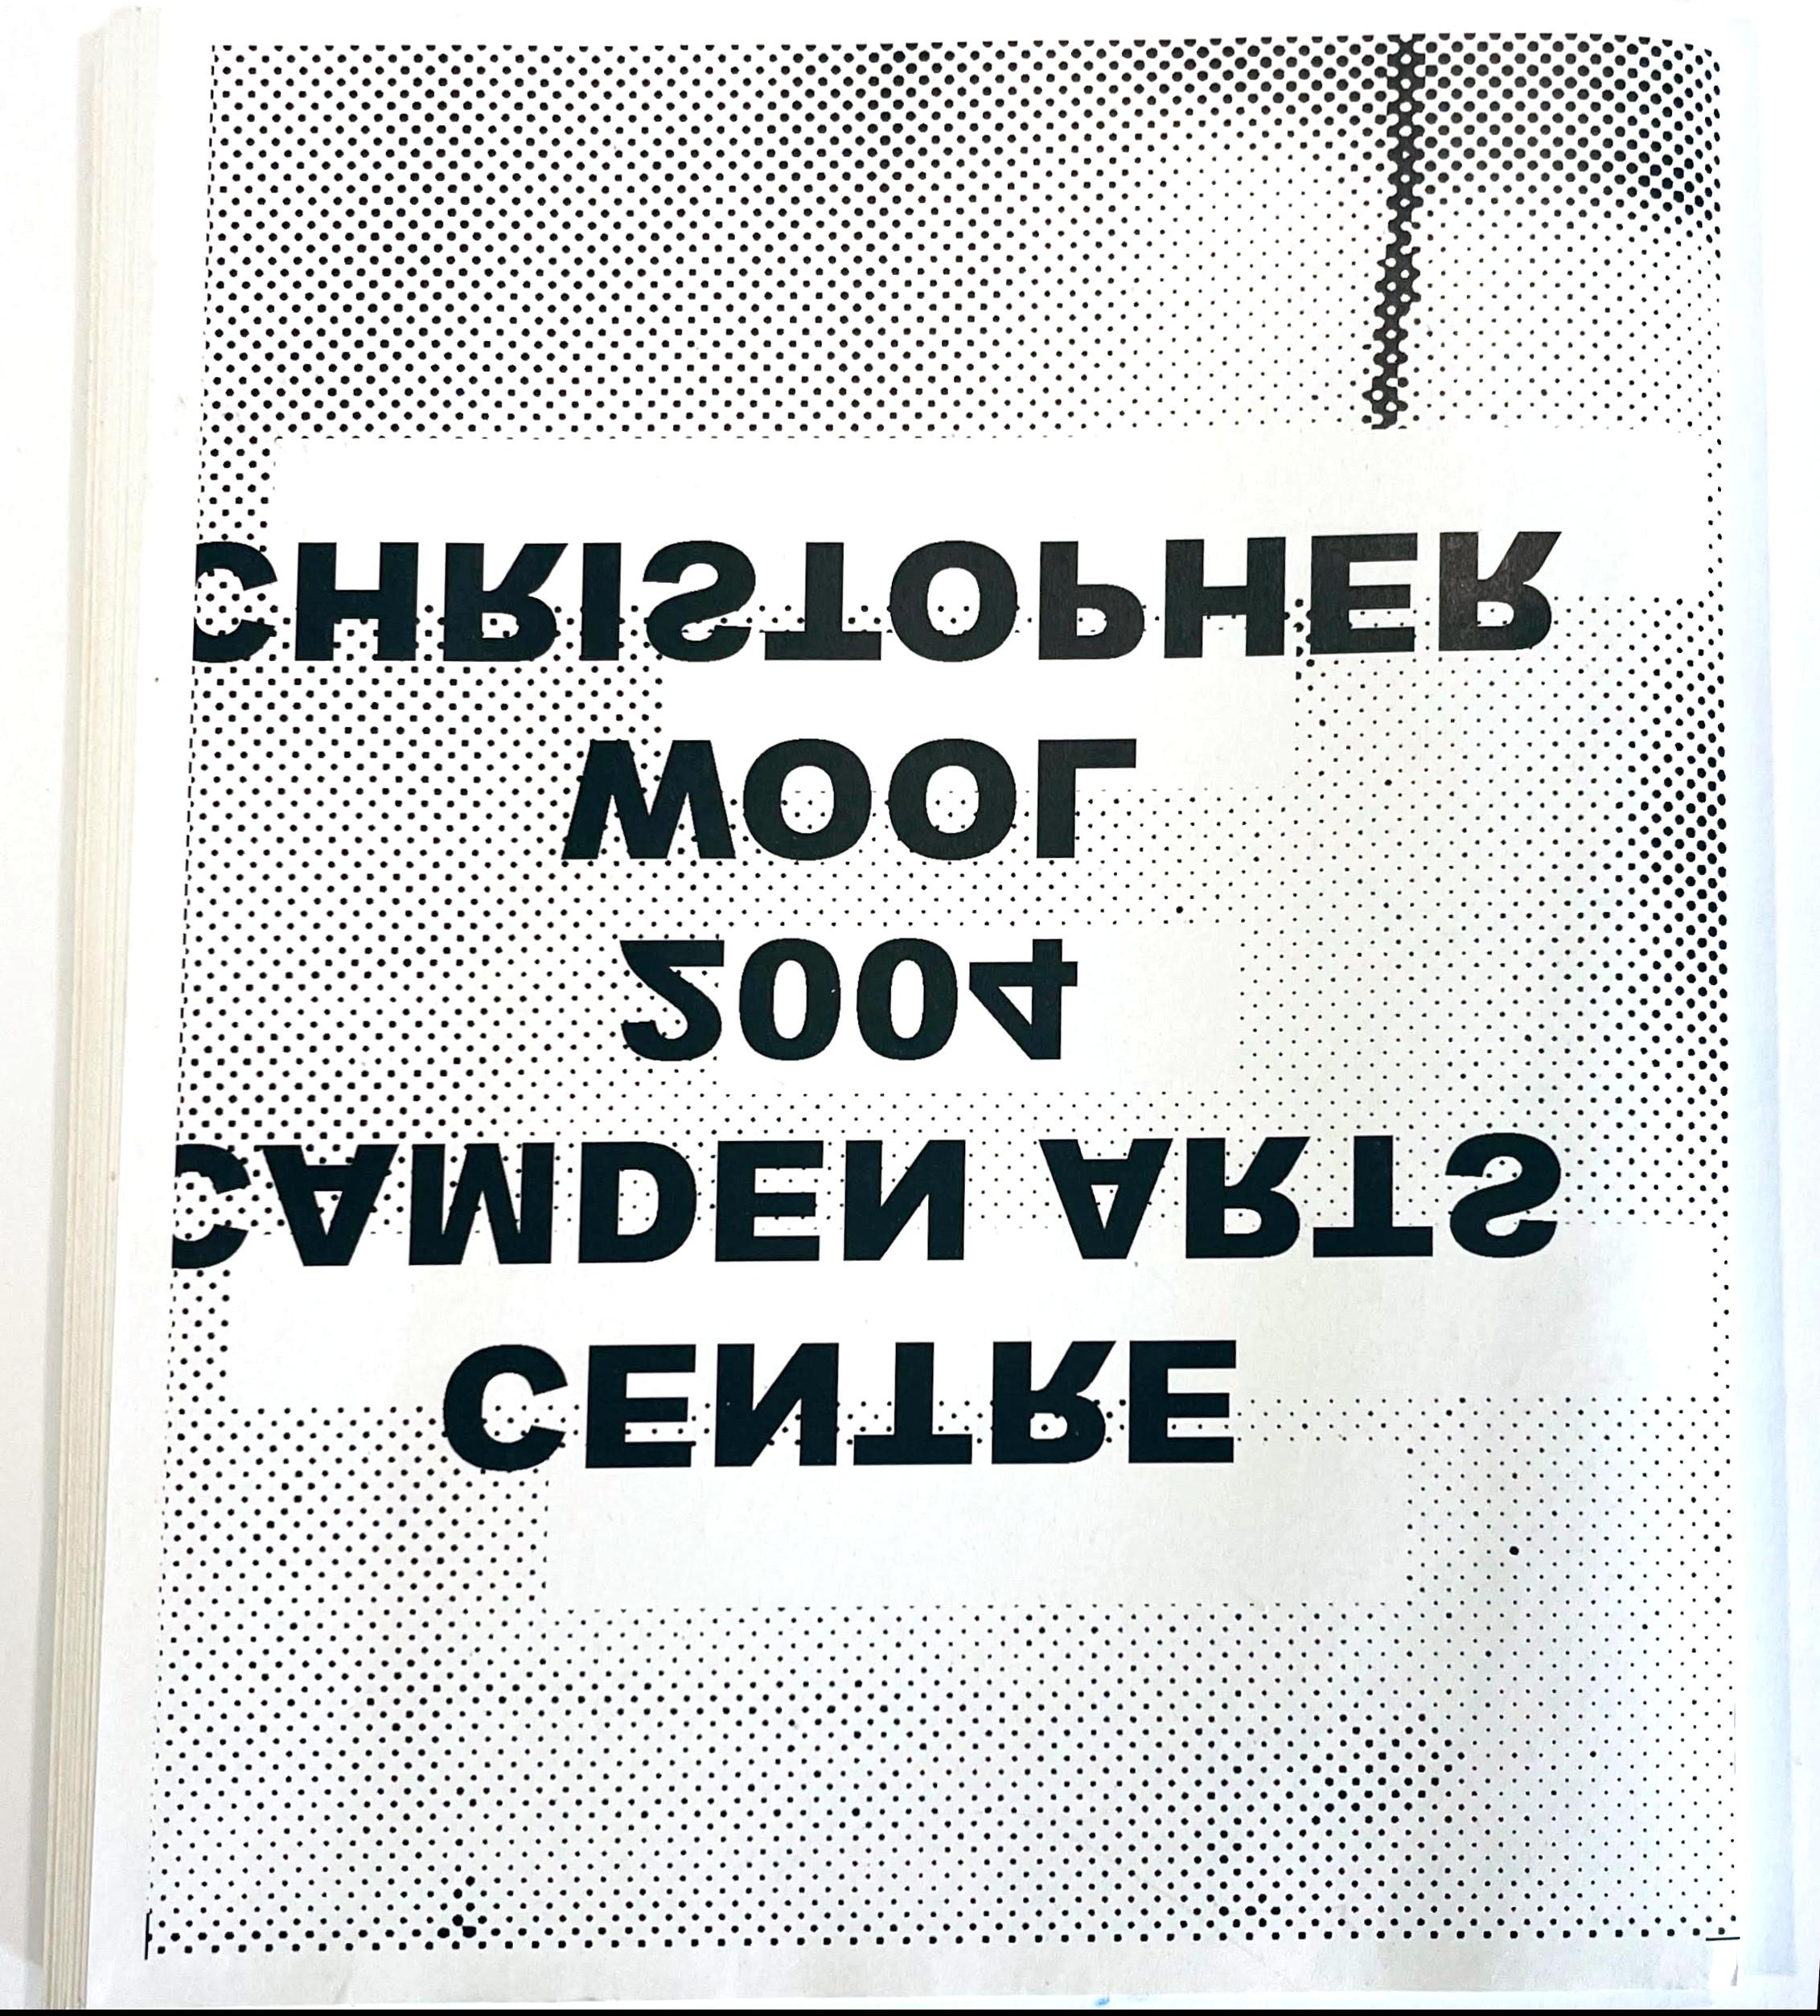 2004 Camden Arts Centre catalogue (Hand signed and dated by Christopher Wool) For Sale 5